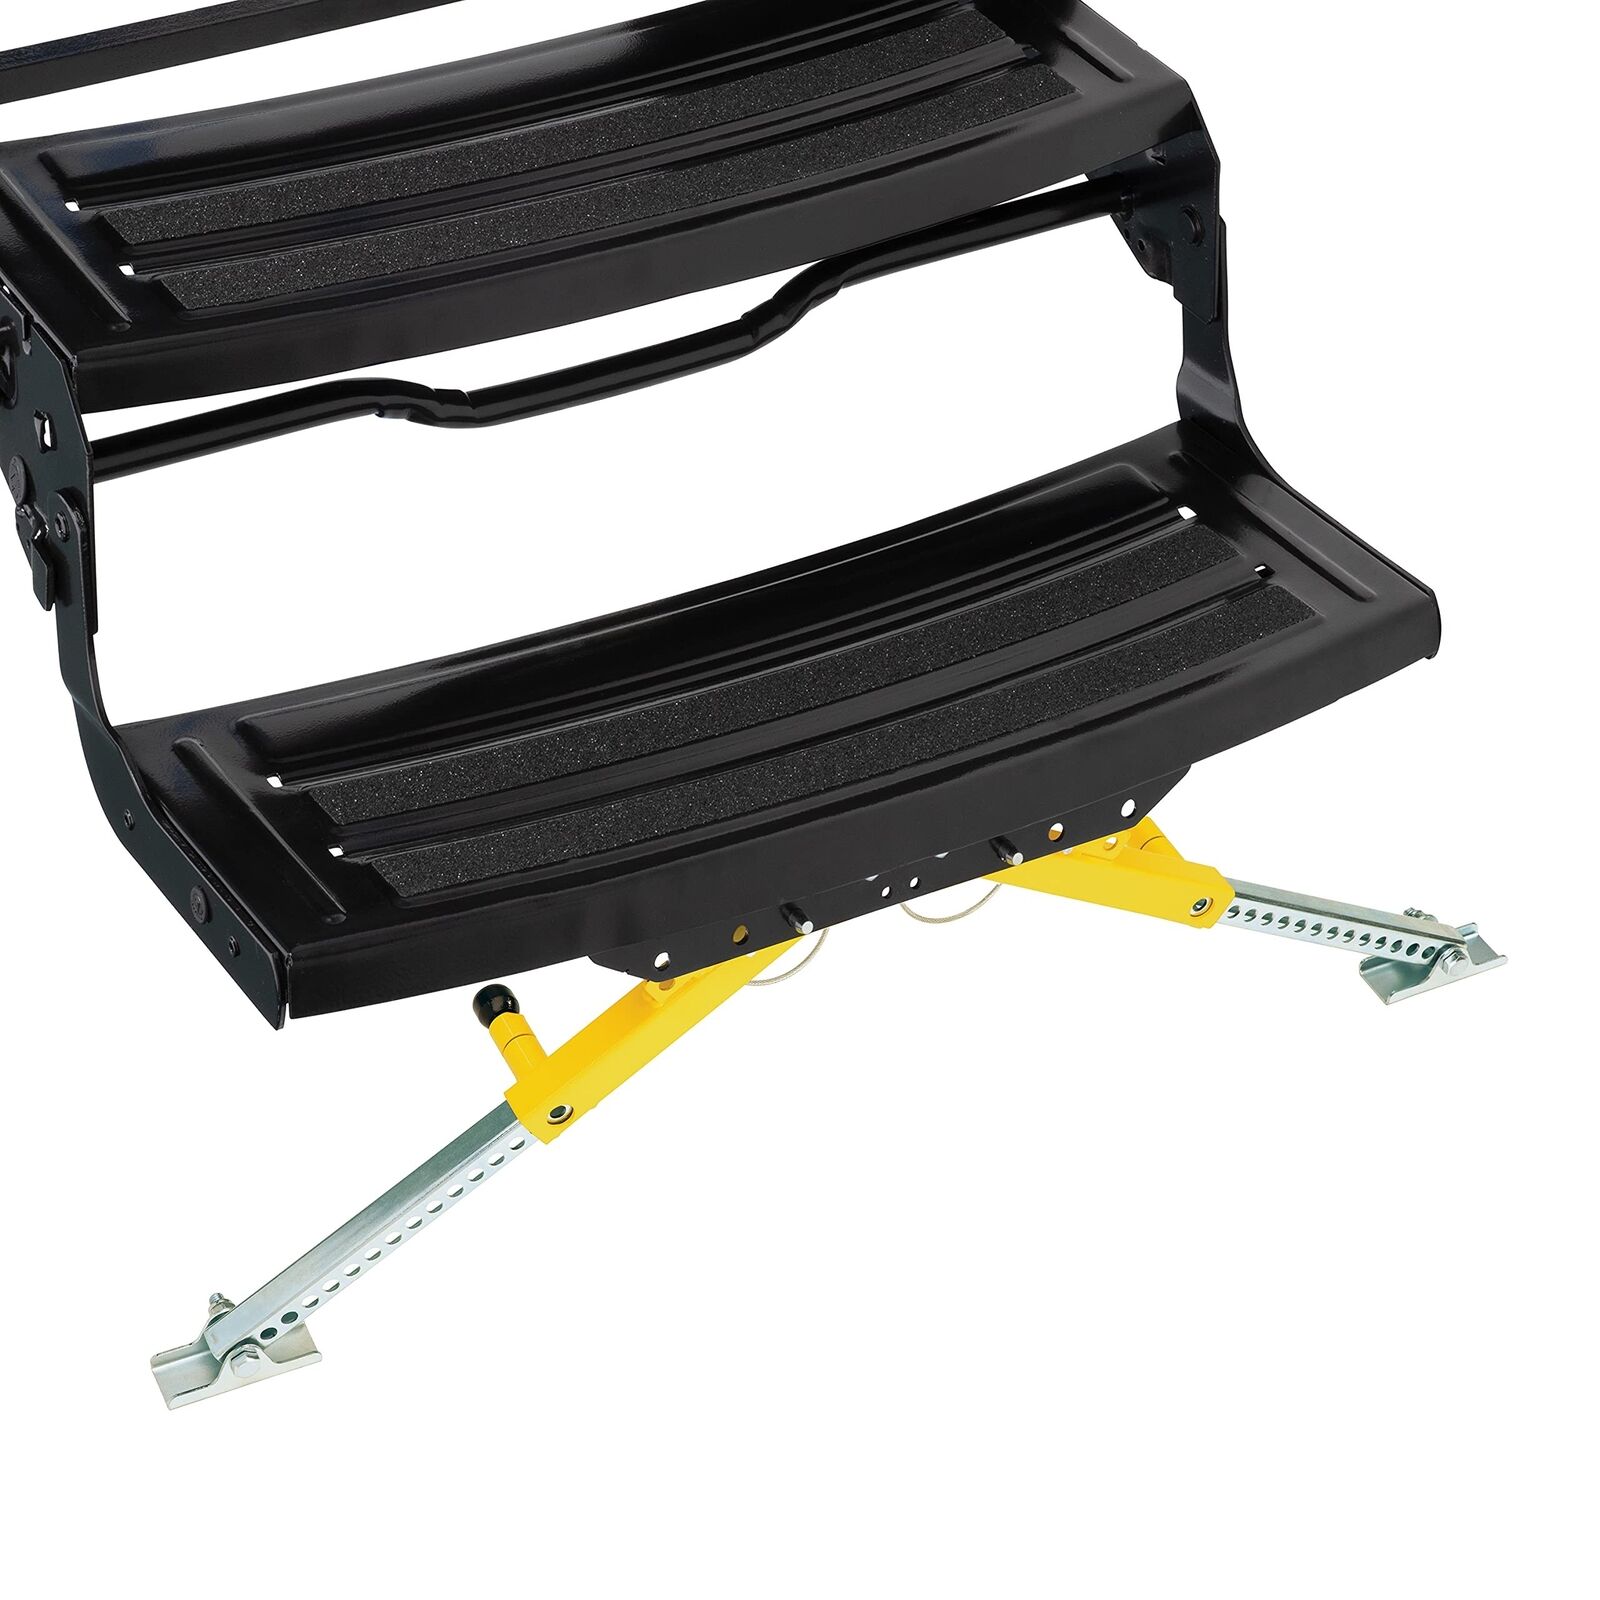 Lippert Solid Stance RV Step Stabilizer Kit for 5th Wheels, Travel Trailers a...